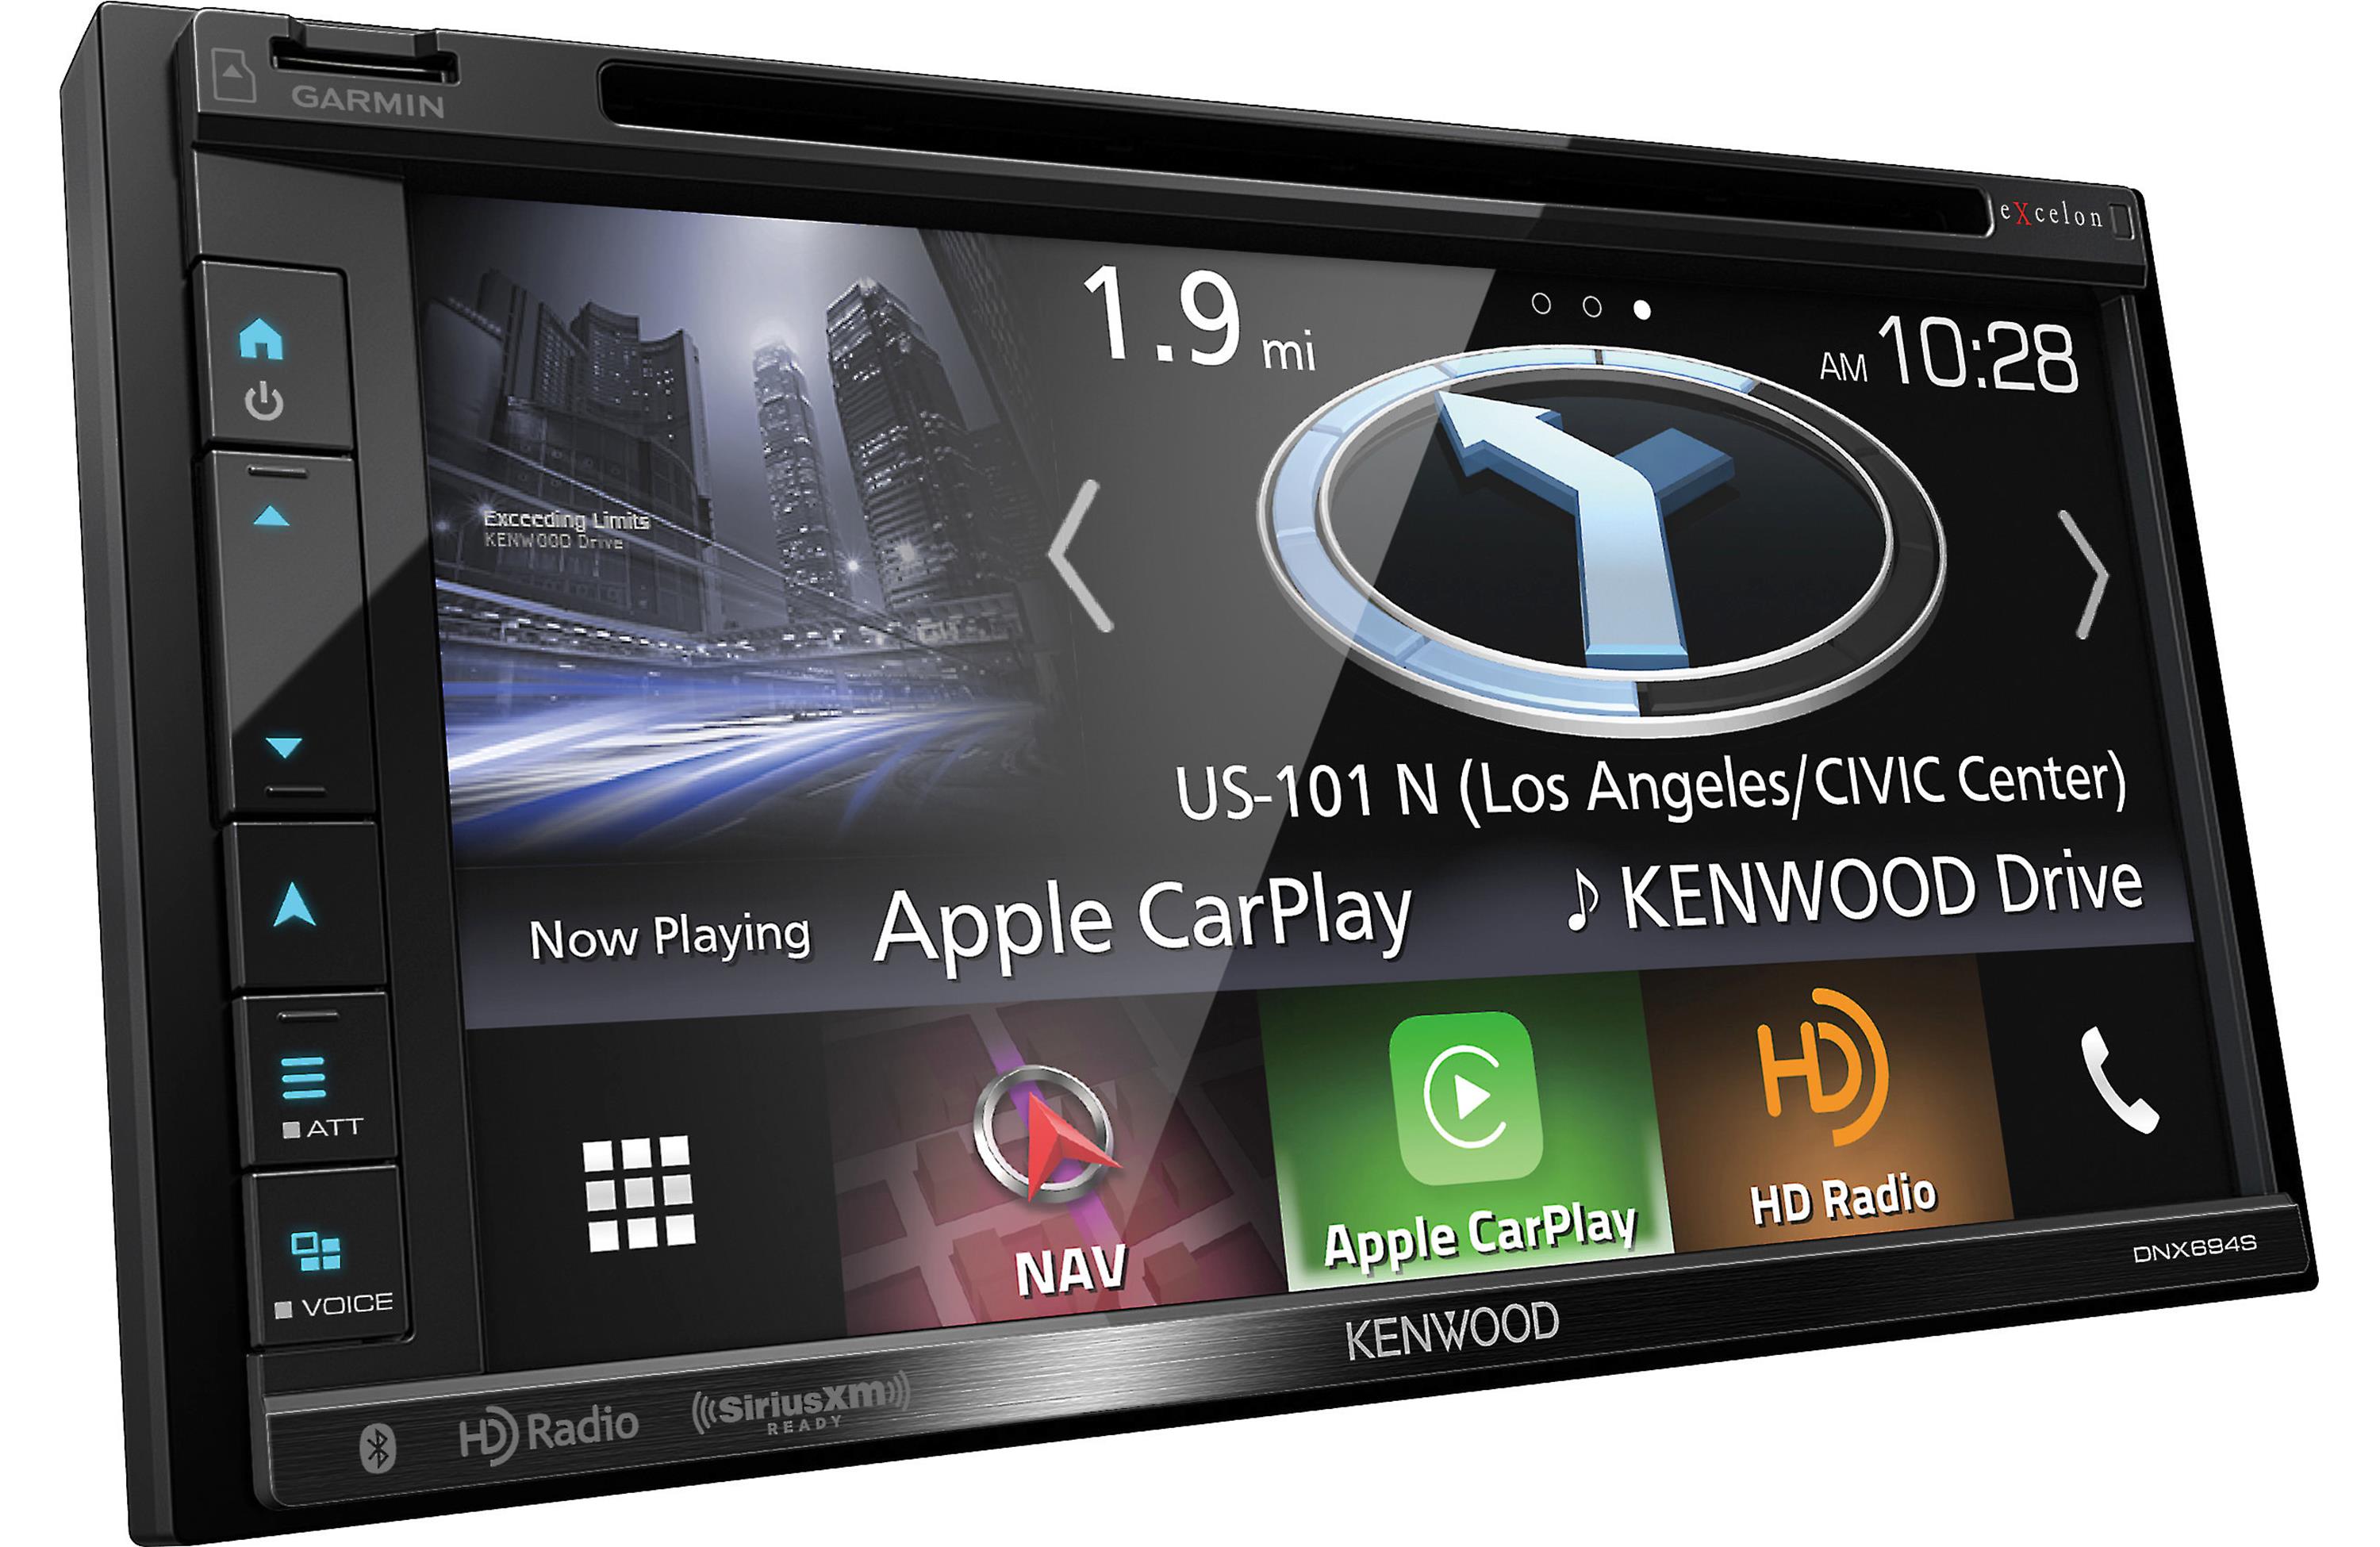 kenwood-dnx694s-2-din-av-navigation-system-with-bluetooth-and-hd